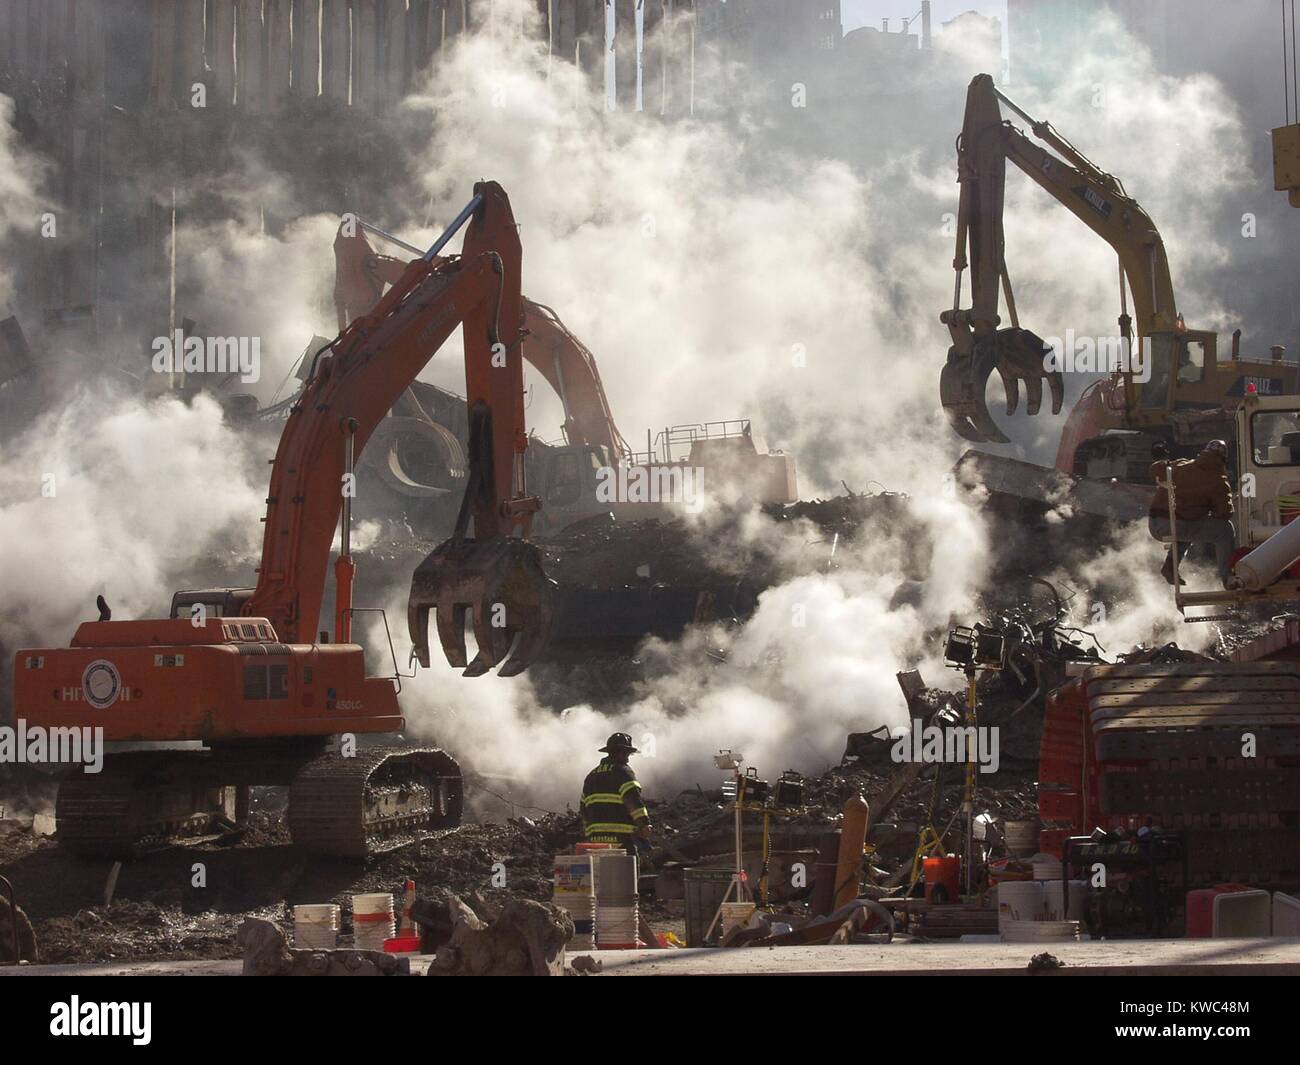 Ground Zero still smolders as recovery operations continue a month after the terrorist attack. Oct. 10, 2001. Excavating equipment works in coordination with rescue workers. World Trade Center, New York City, after September 11, 2001 terrorist attacks. (BSLOC 2015 2 116) Stock Photo